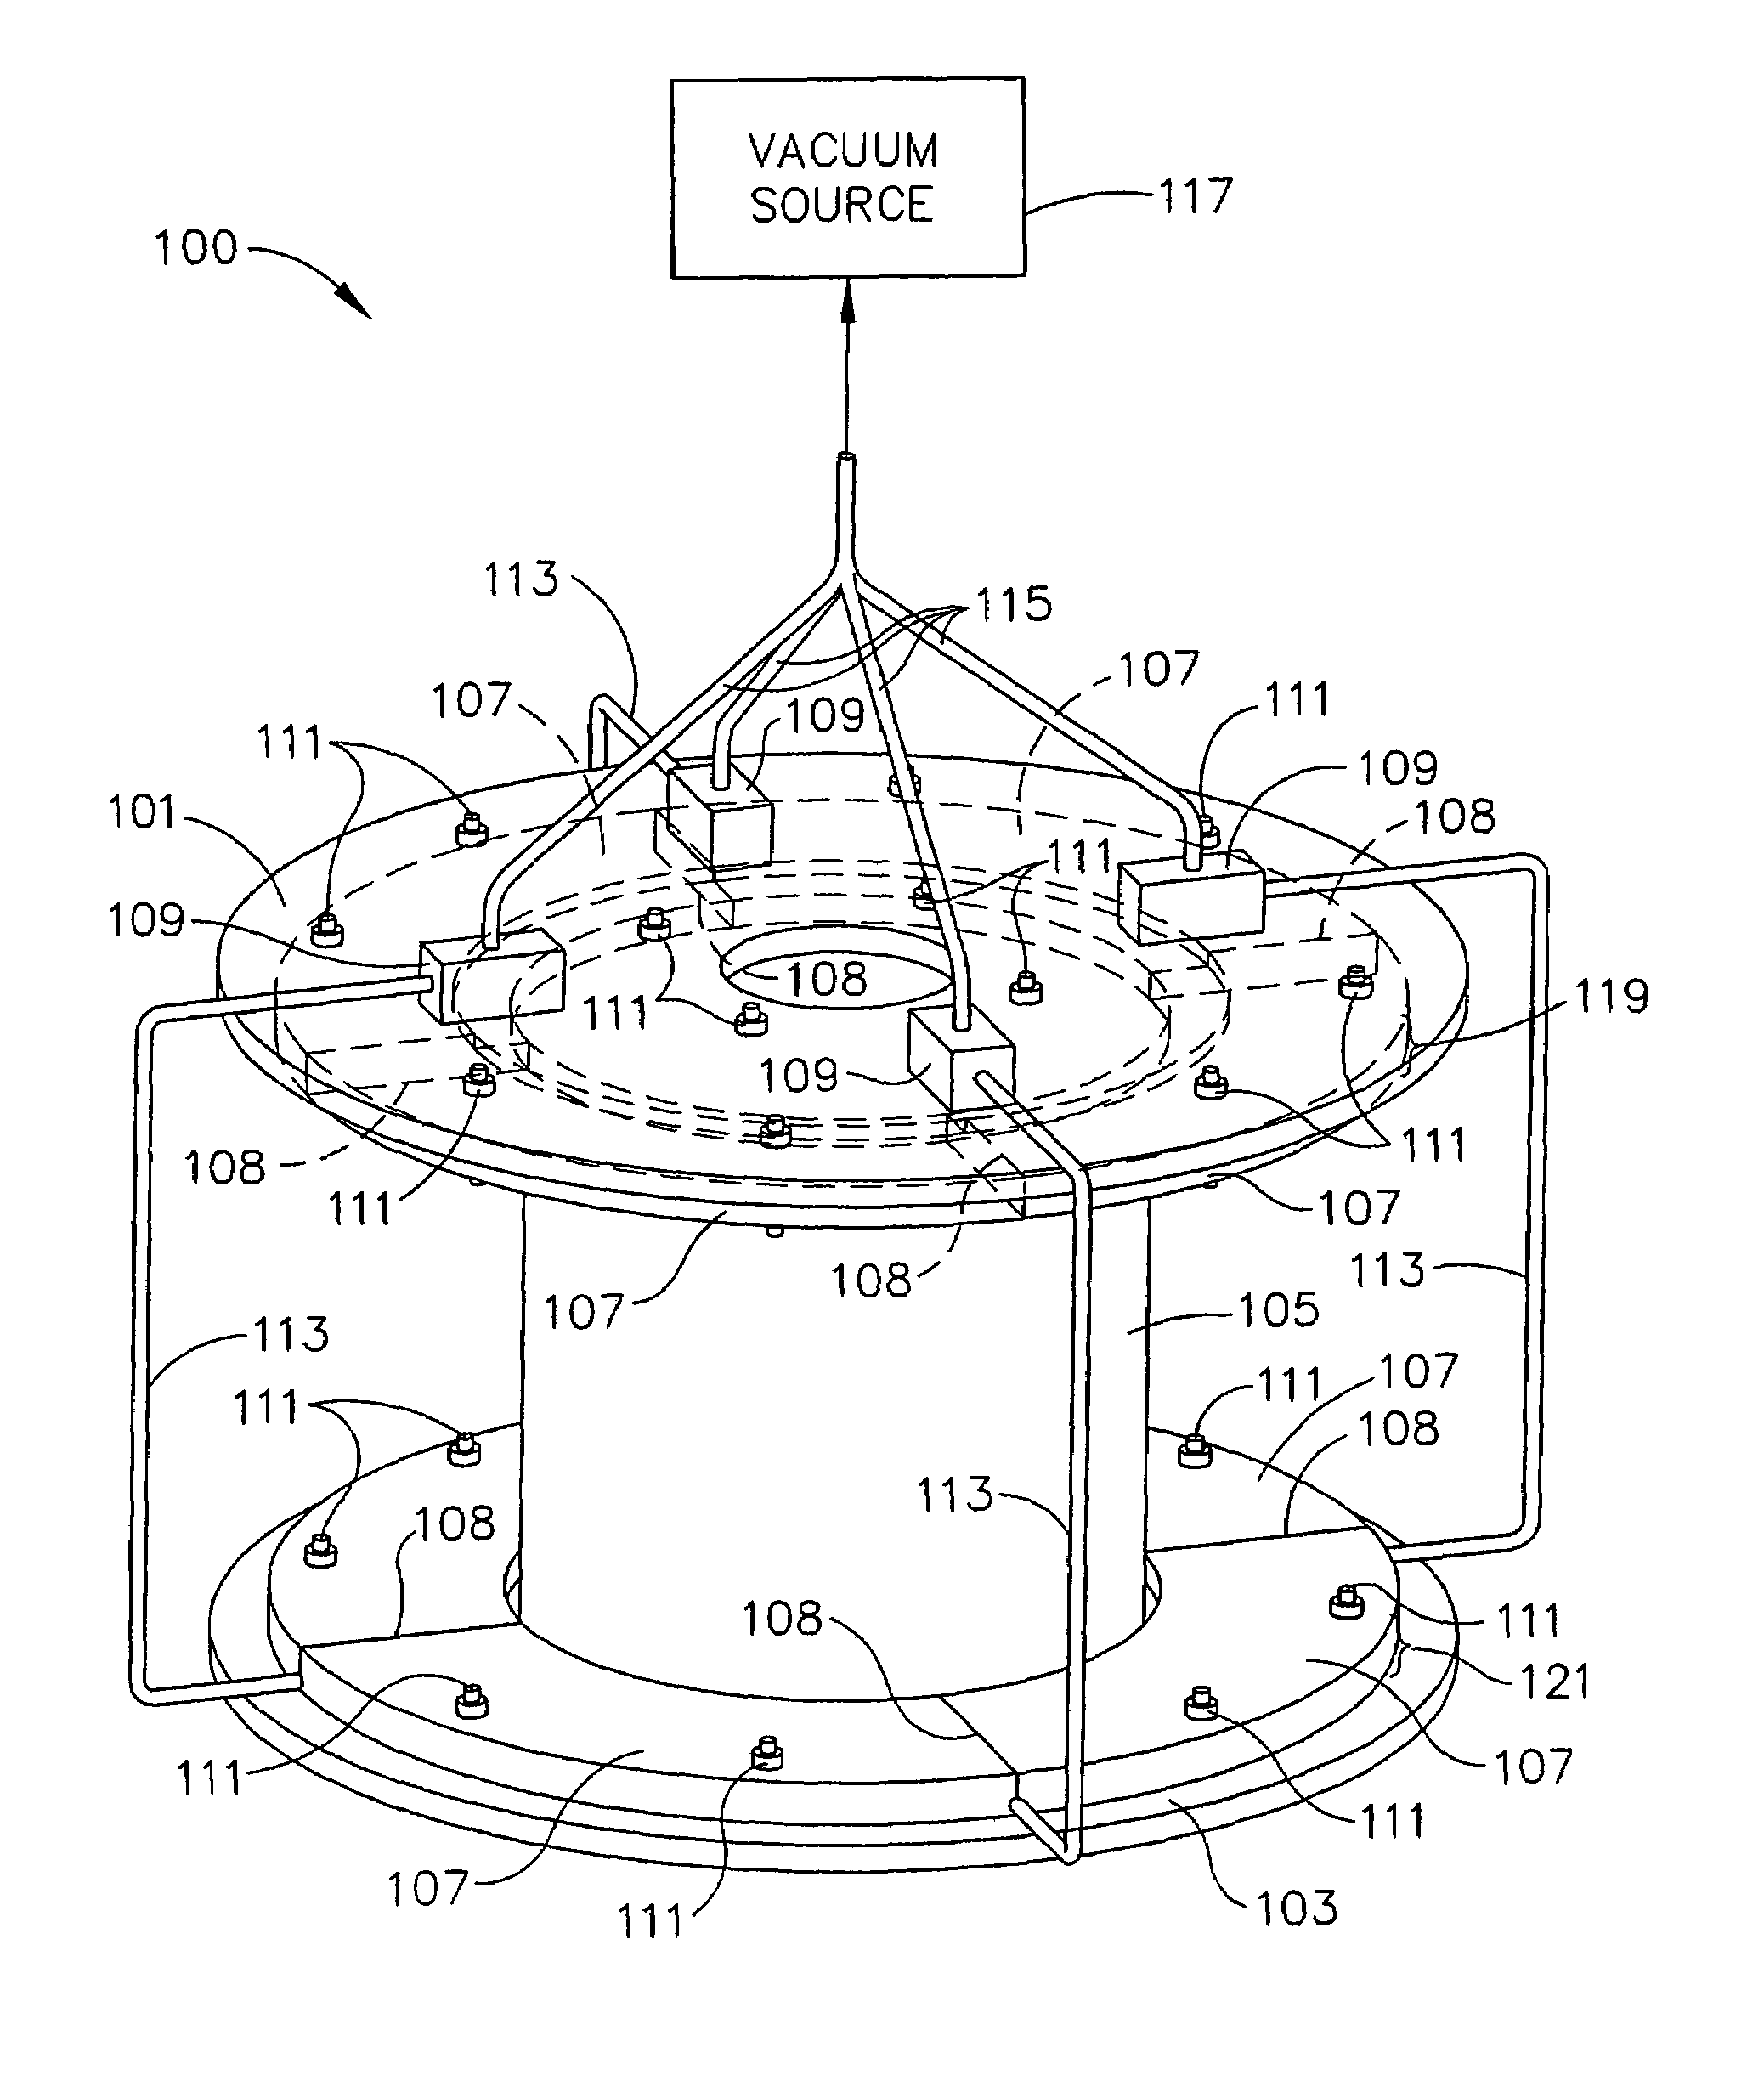 Method for fabricating reinforced composite materials